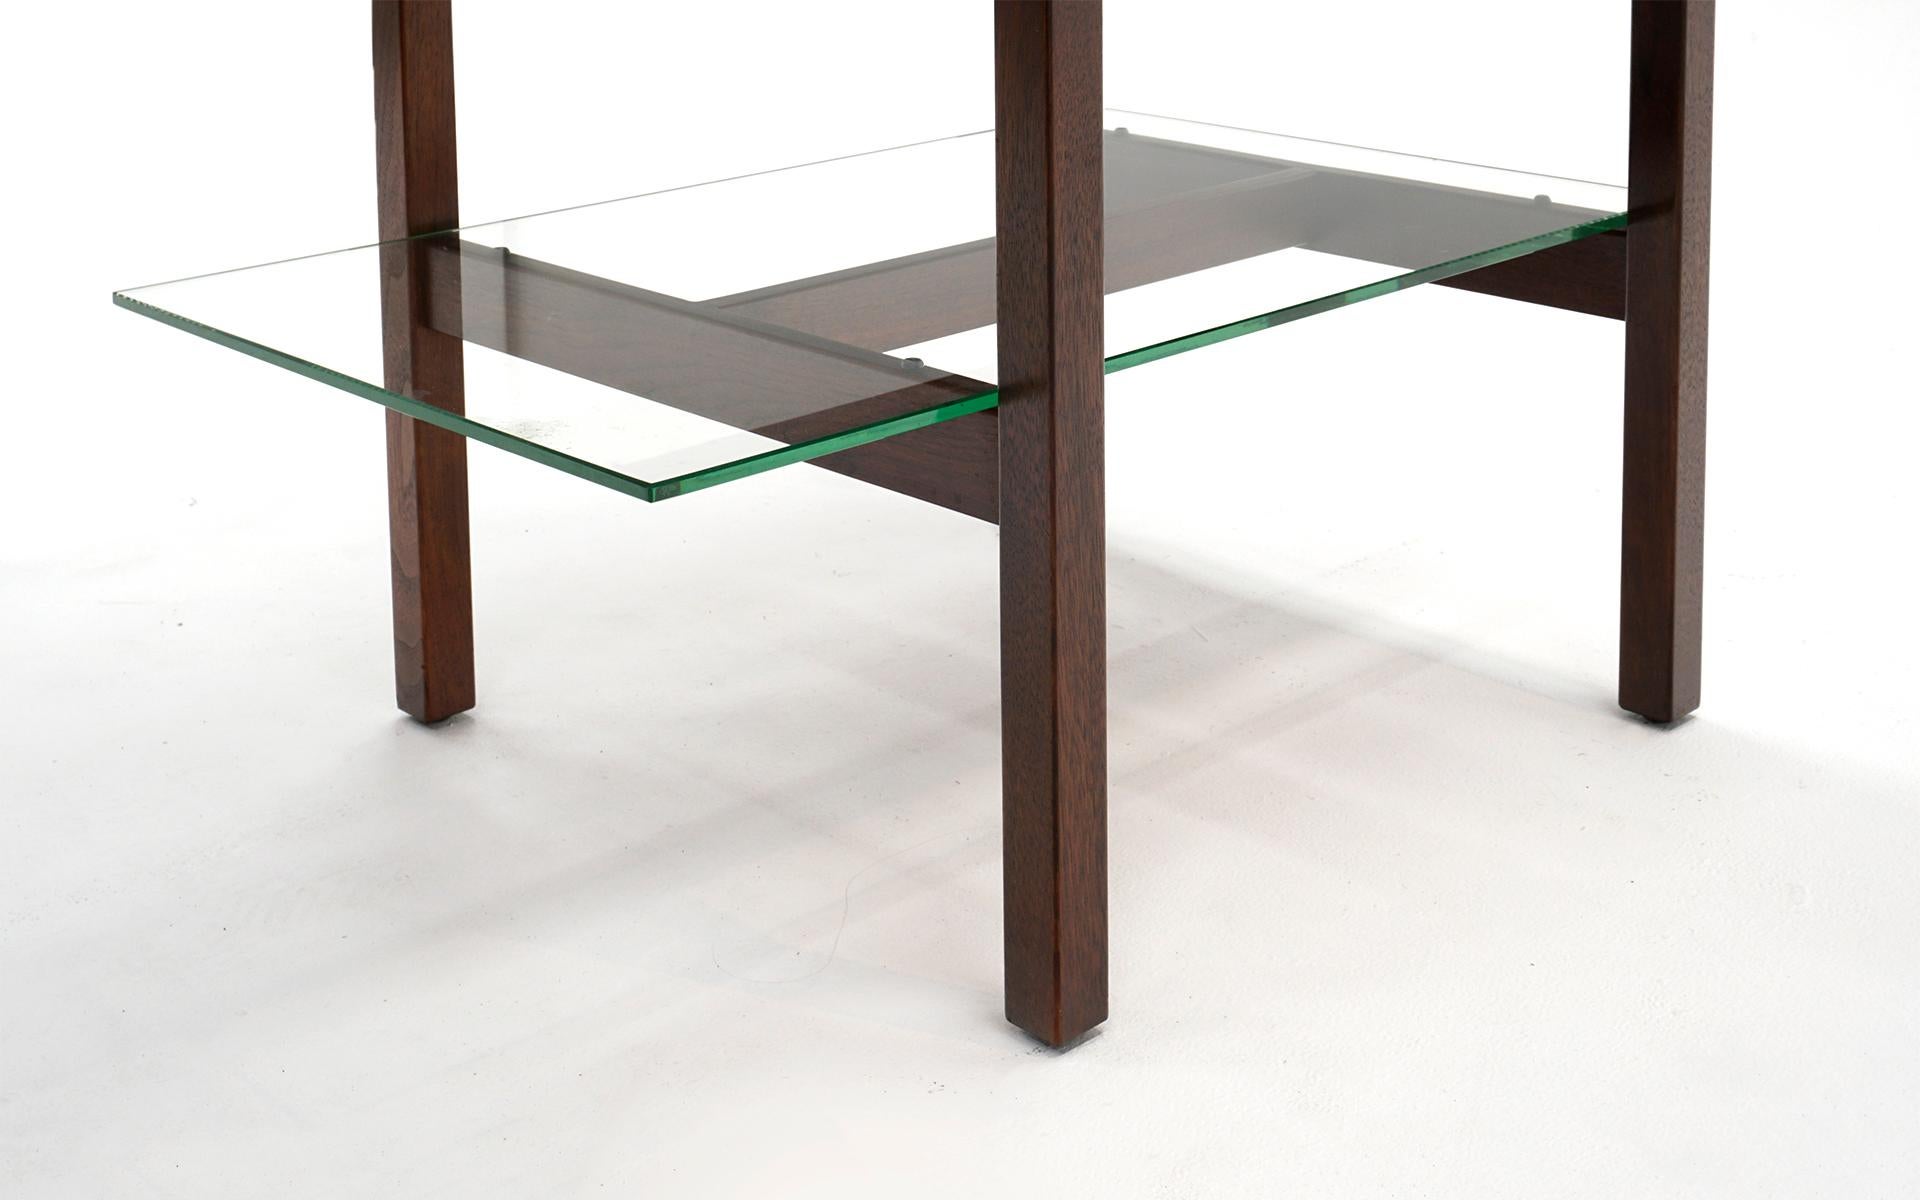 Mid-20th Century Two Tier Side Table, Walnut and Glass, Rectangular by Jens Risom, Signed